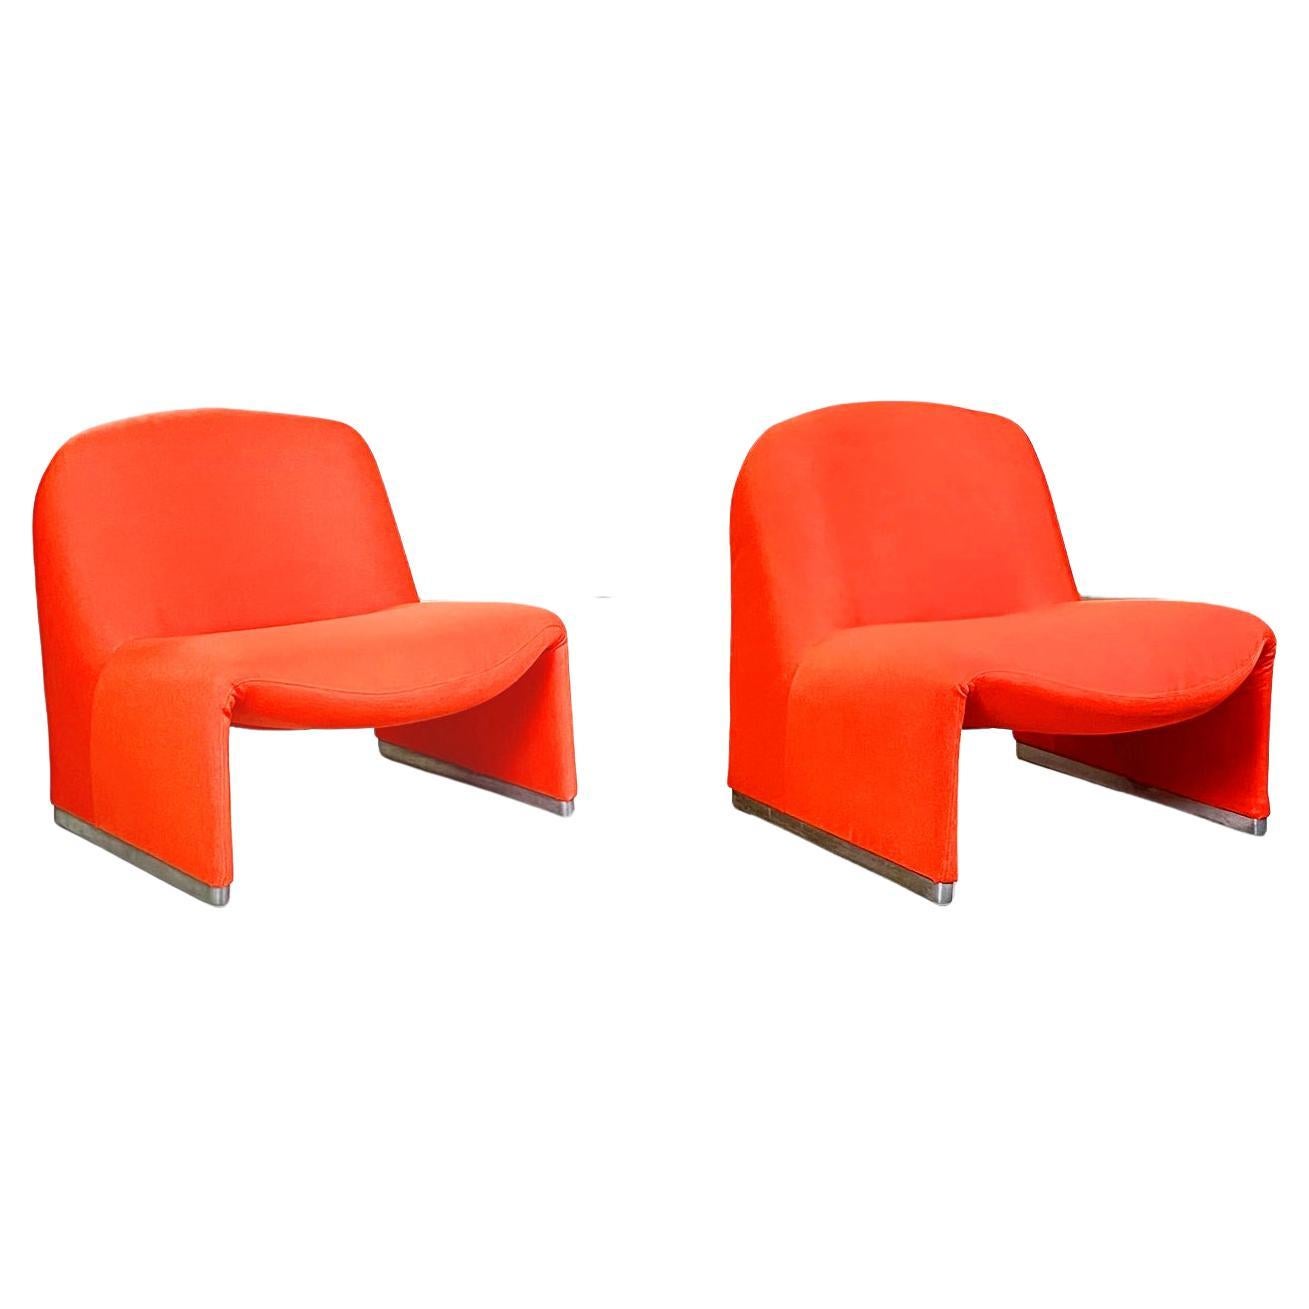 Italian Modern Red Chairs Alky by Giancarlo Piretti for Anonima Castelli, 1970s